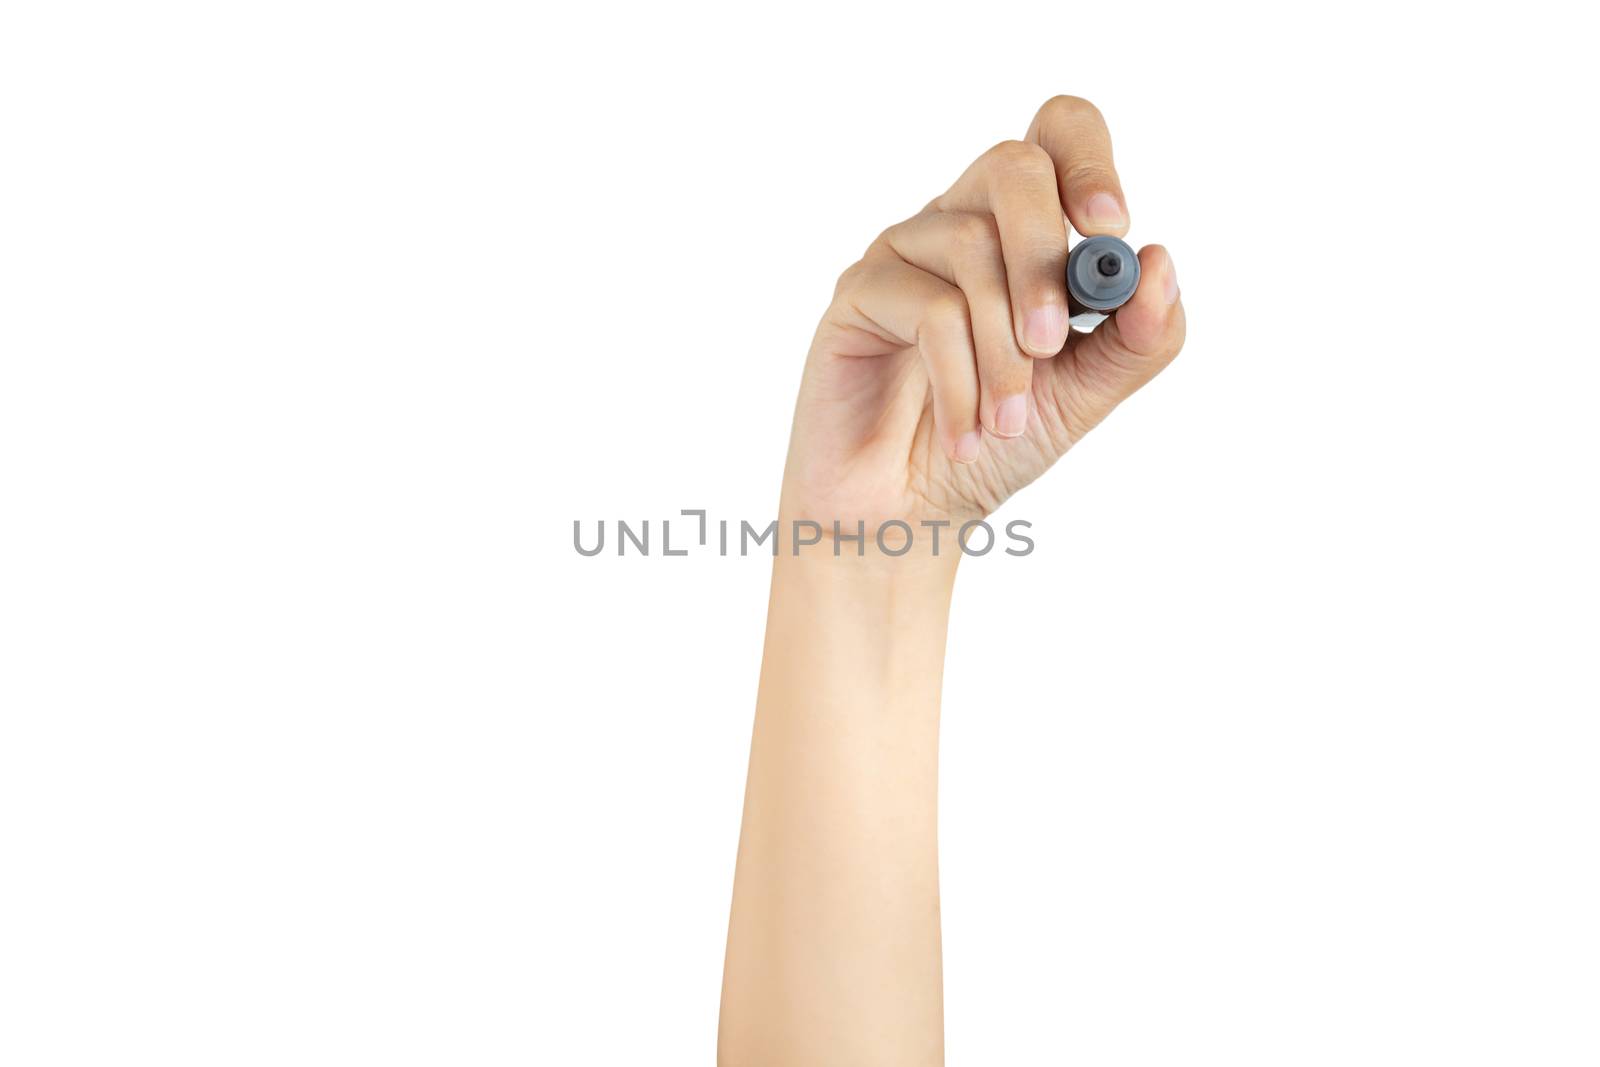 hand holding black magic marker pen ready to writing something isolated on white background with copy space, studio shot, front view